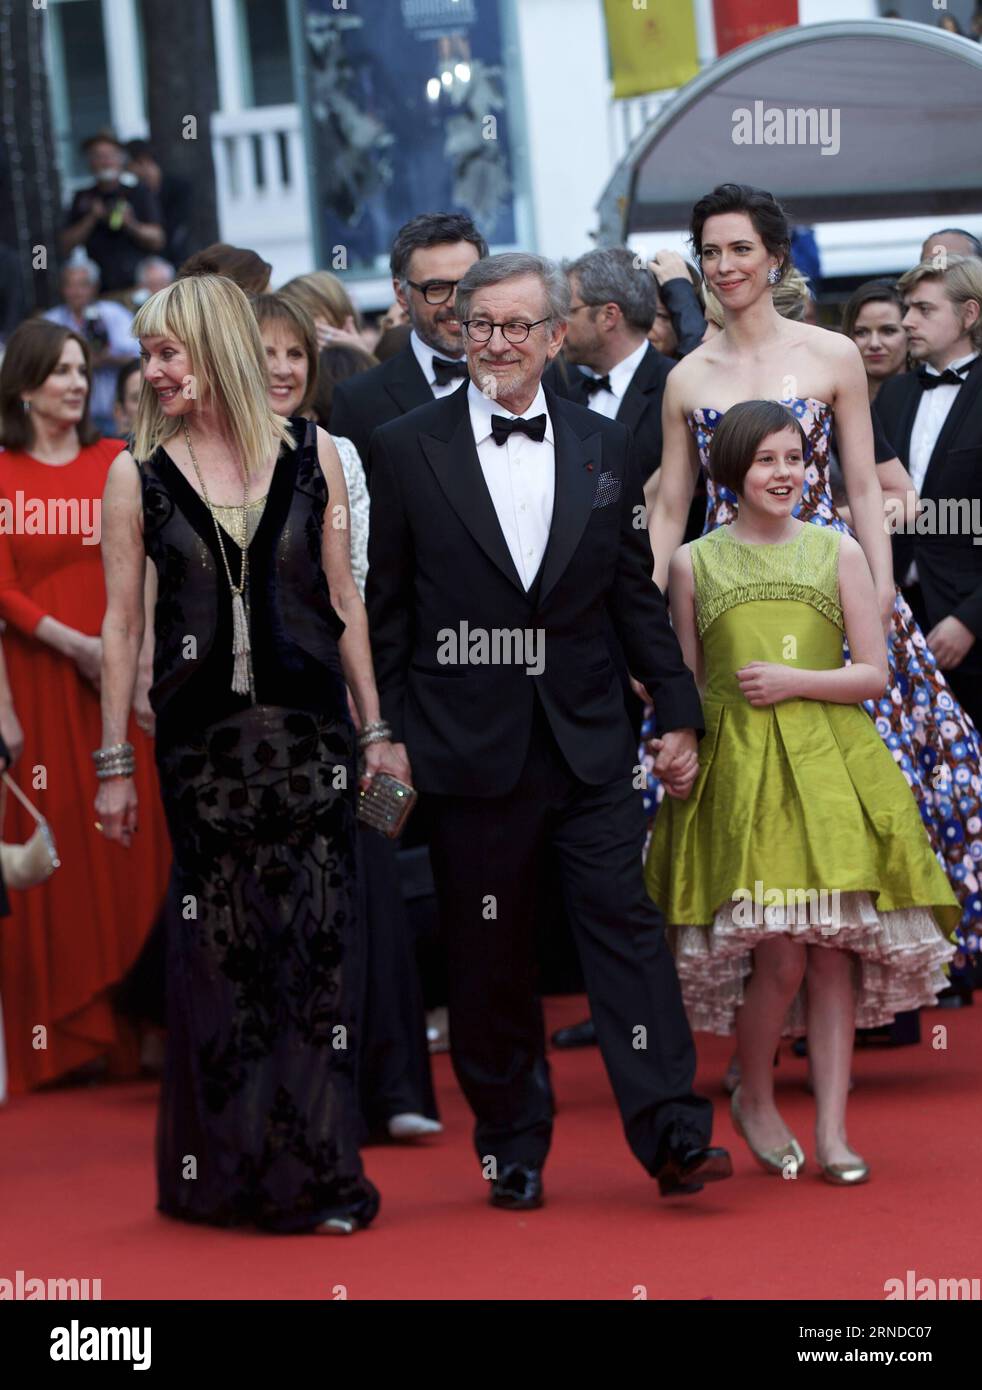 (160515) -- CANNES, May 14, 2016 -- Director Steven Spielberg (front C) and his wife Kate Capshaw (front L) and cast member Ruby Barnhill (front R) pose on the red carpet as they arrive for the screening of the film The BFG at the 69th Cannes Film Festival in Cannes, France, May 14, 2016.) FRANCE-CANNES-FILM FESTIVAL-THE BFG-RED CARPET JinxYu PUBLICATIONxNOTxINxCHN   160515 Cannes May 14 2016 Director Steven Spielberg Front C and His wife Kate Capshaw Front l and Cast member Ruby Barnhill Front r Pose ON The Red Carpet As They Arrive for The Screening of The Film The BfG AT The 69th Cannes Fil Stock Photo